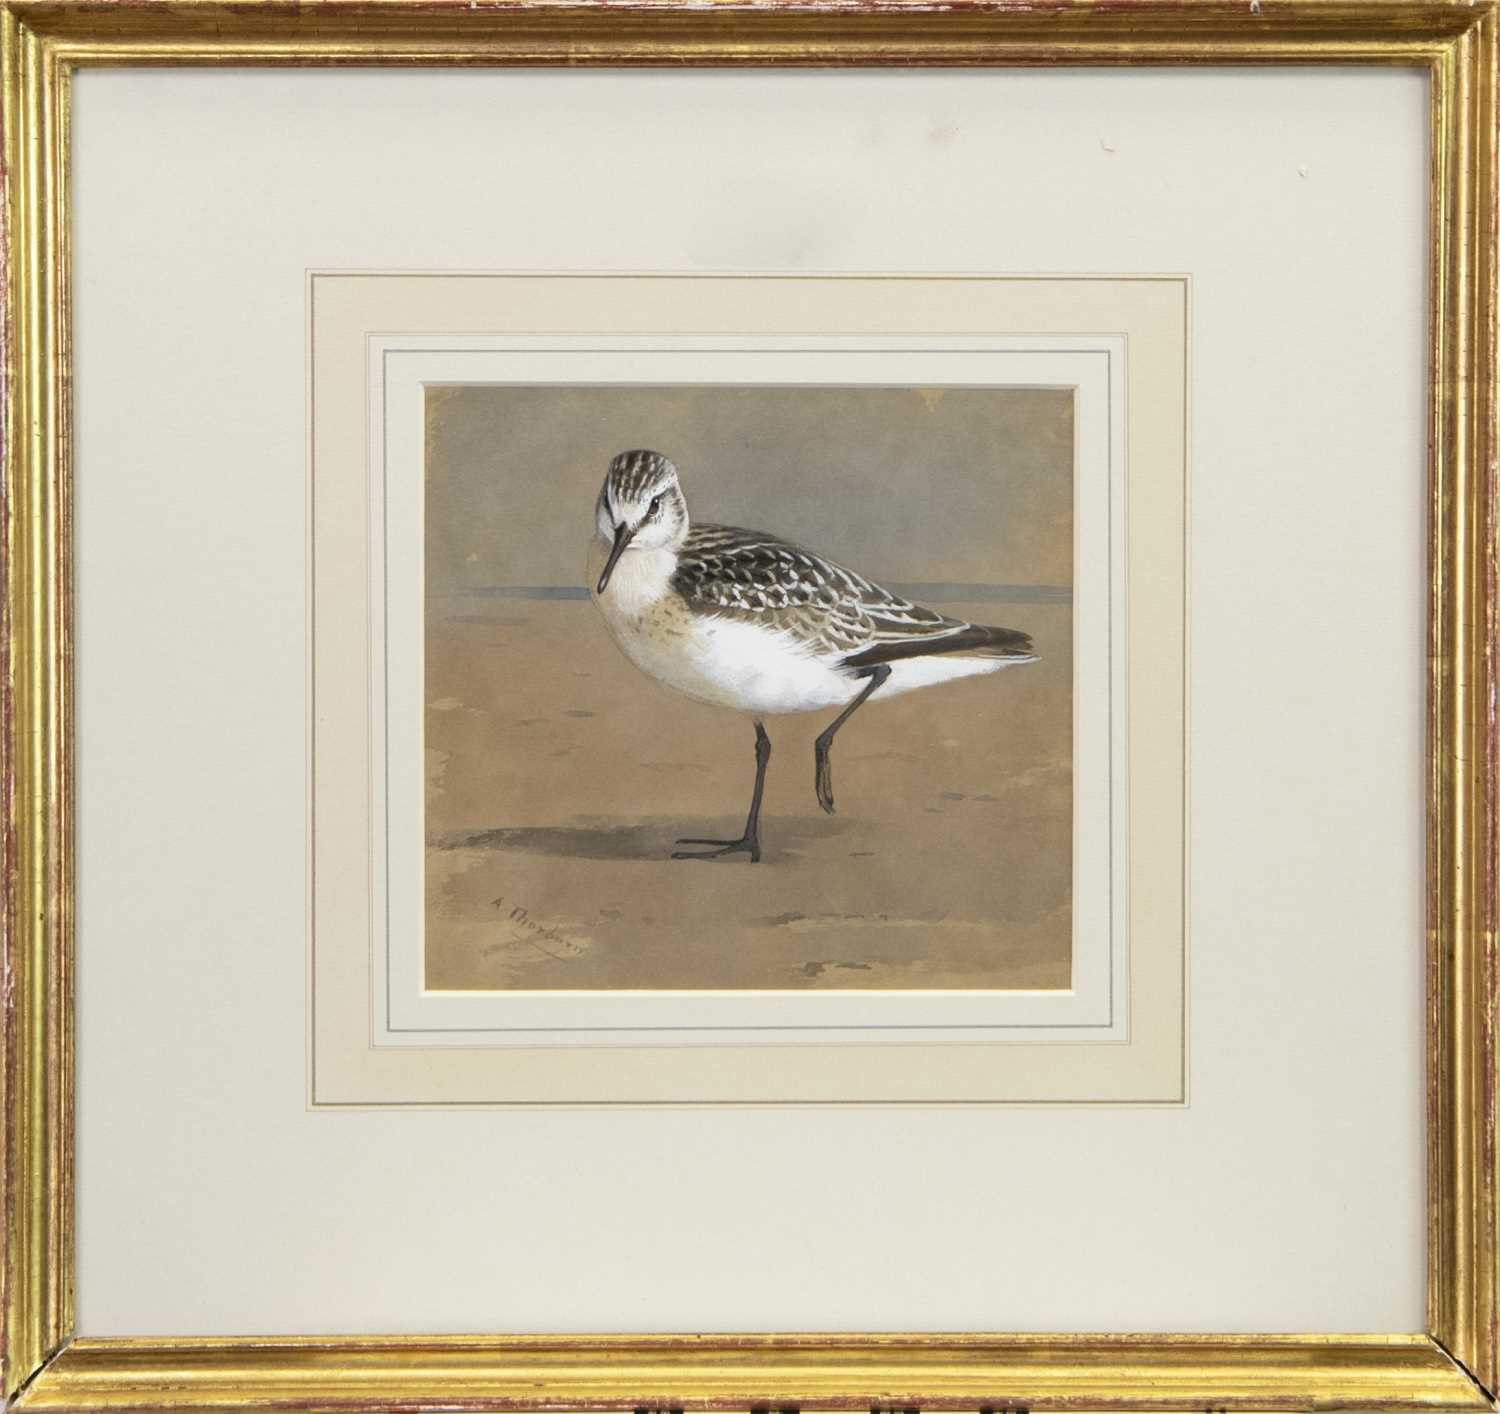 Lot 132 - SANDERLING, A WATERCOLOUR BY ARCHIBALD THORBURN